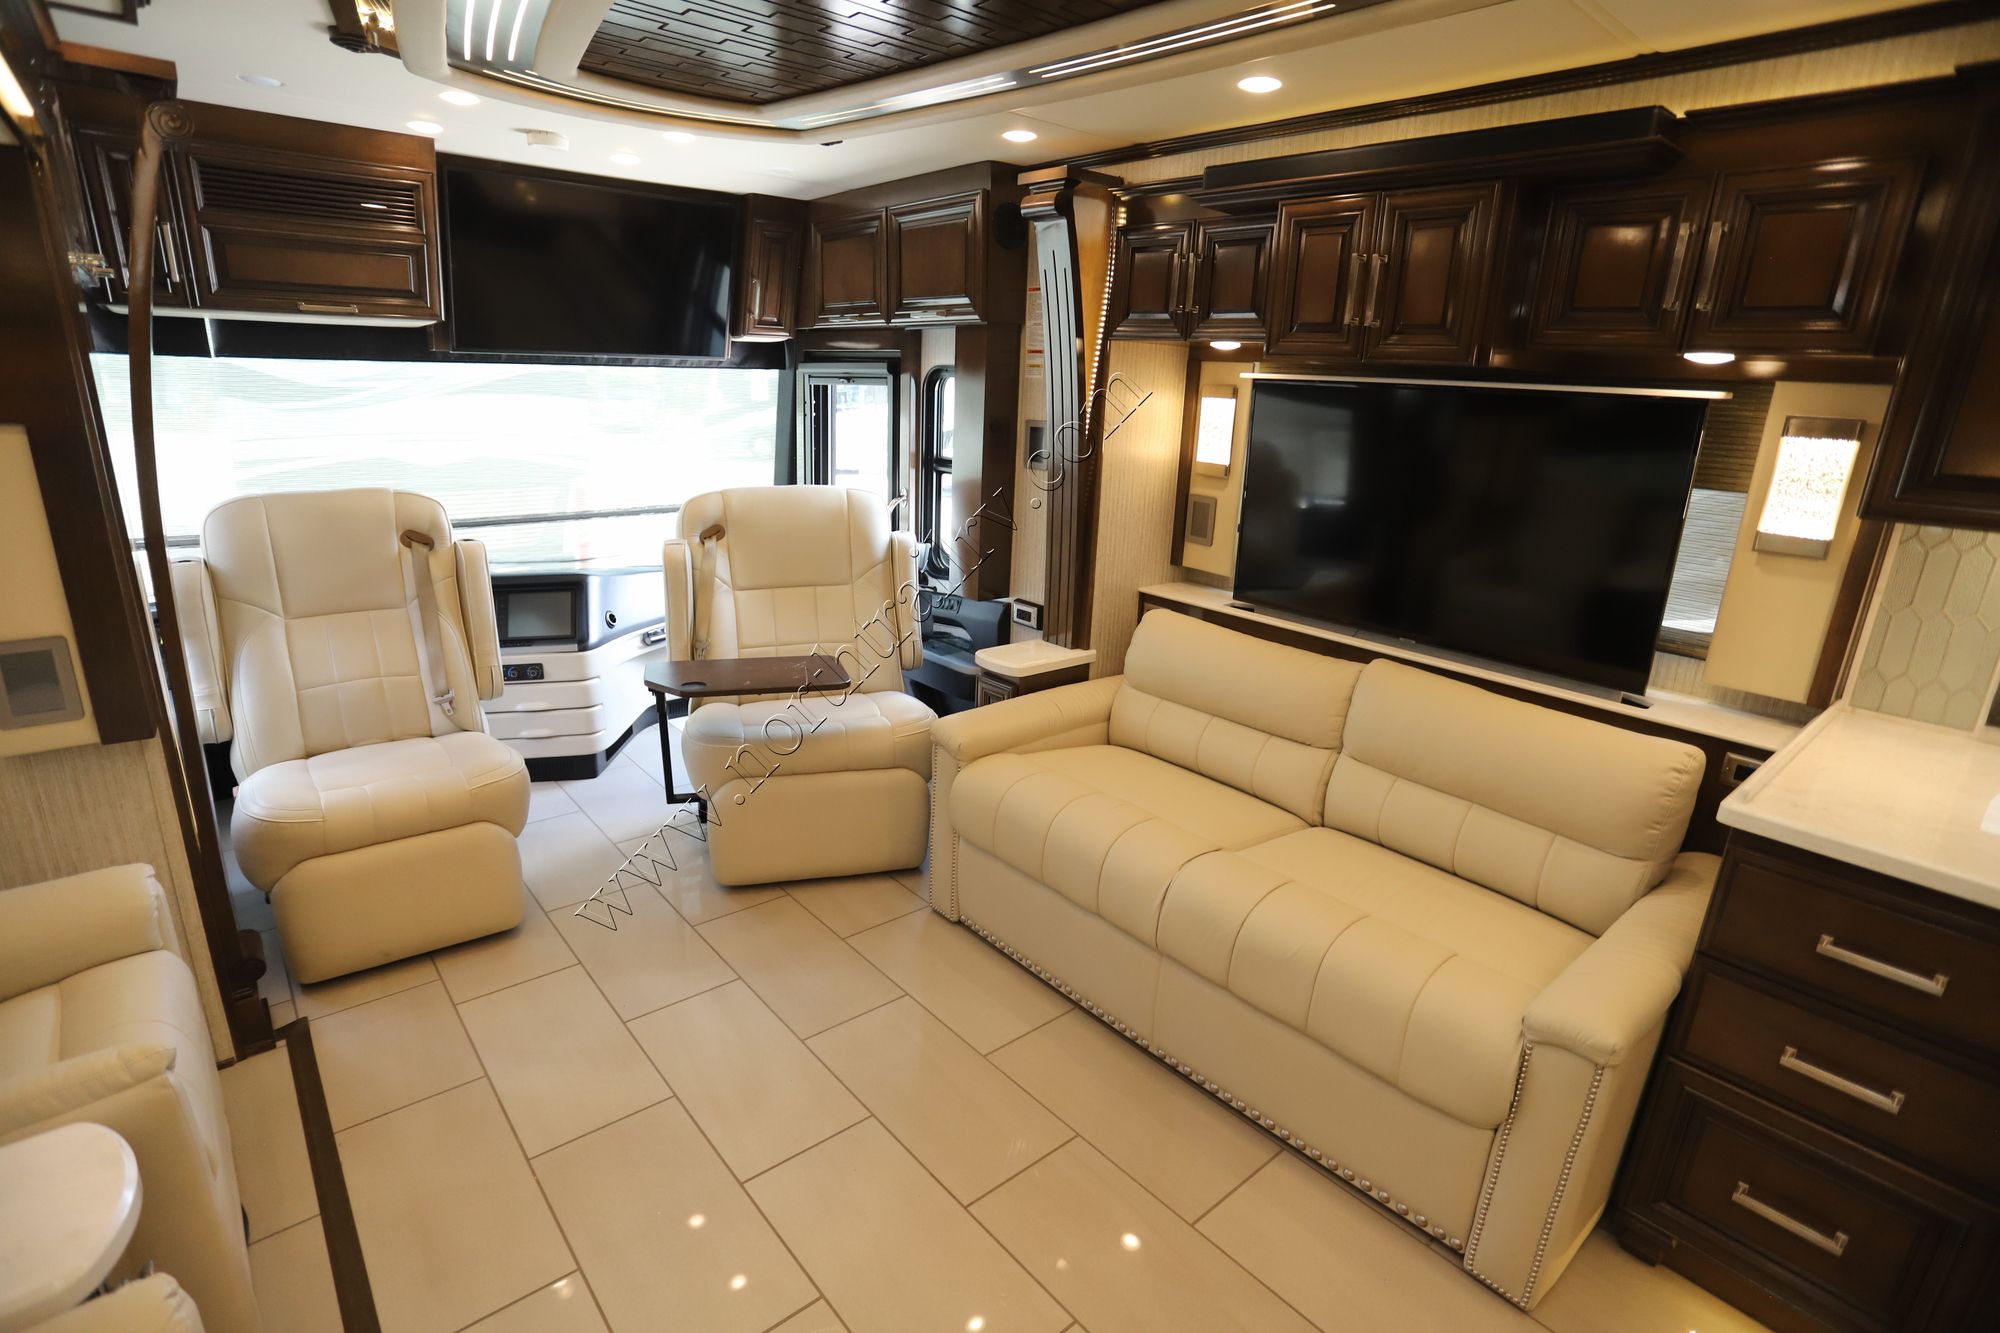 Used 2021 Newmar London Aire 4579 Class A  For Sale